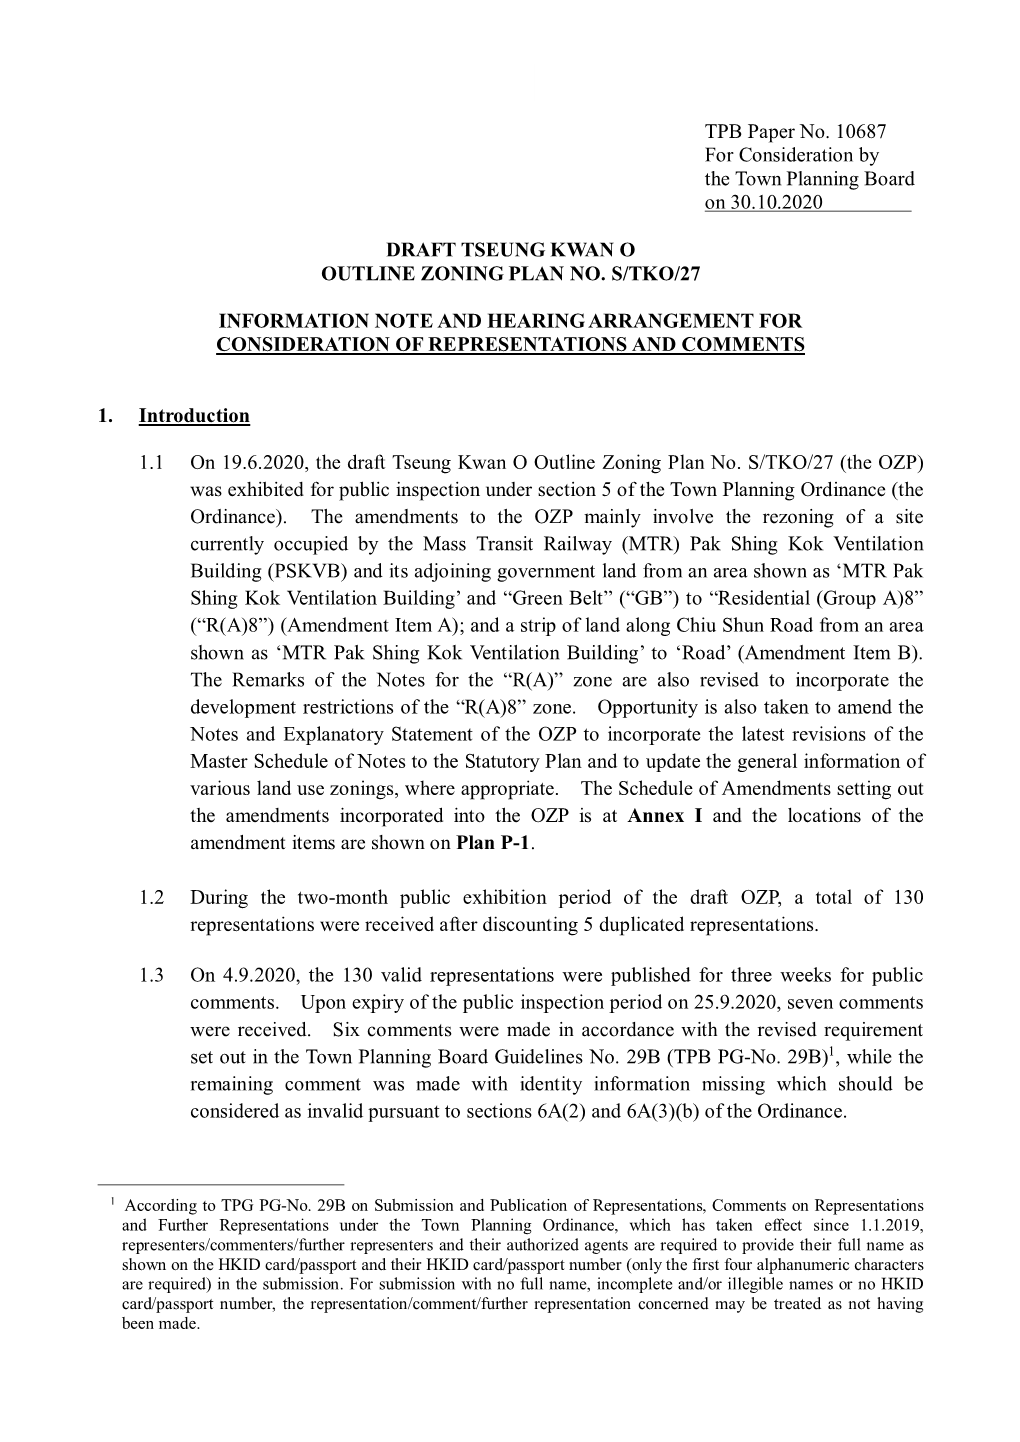 TPB Paper No. 10687 for Consideration by the Town Planning Board on 30.10.2020